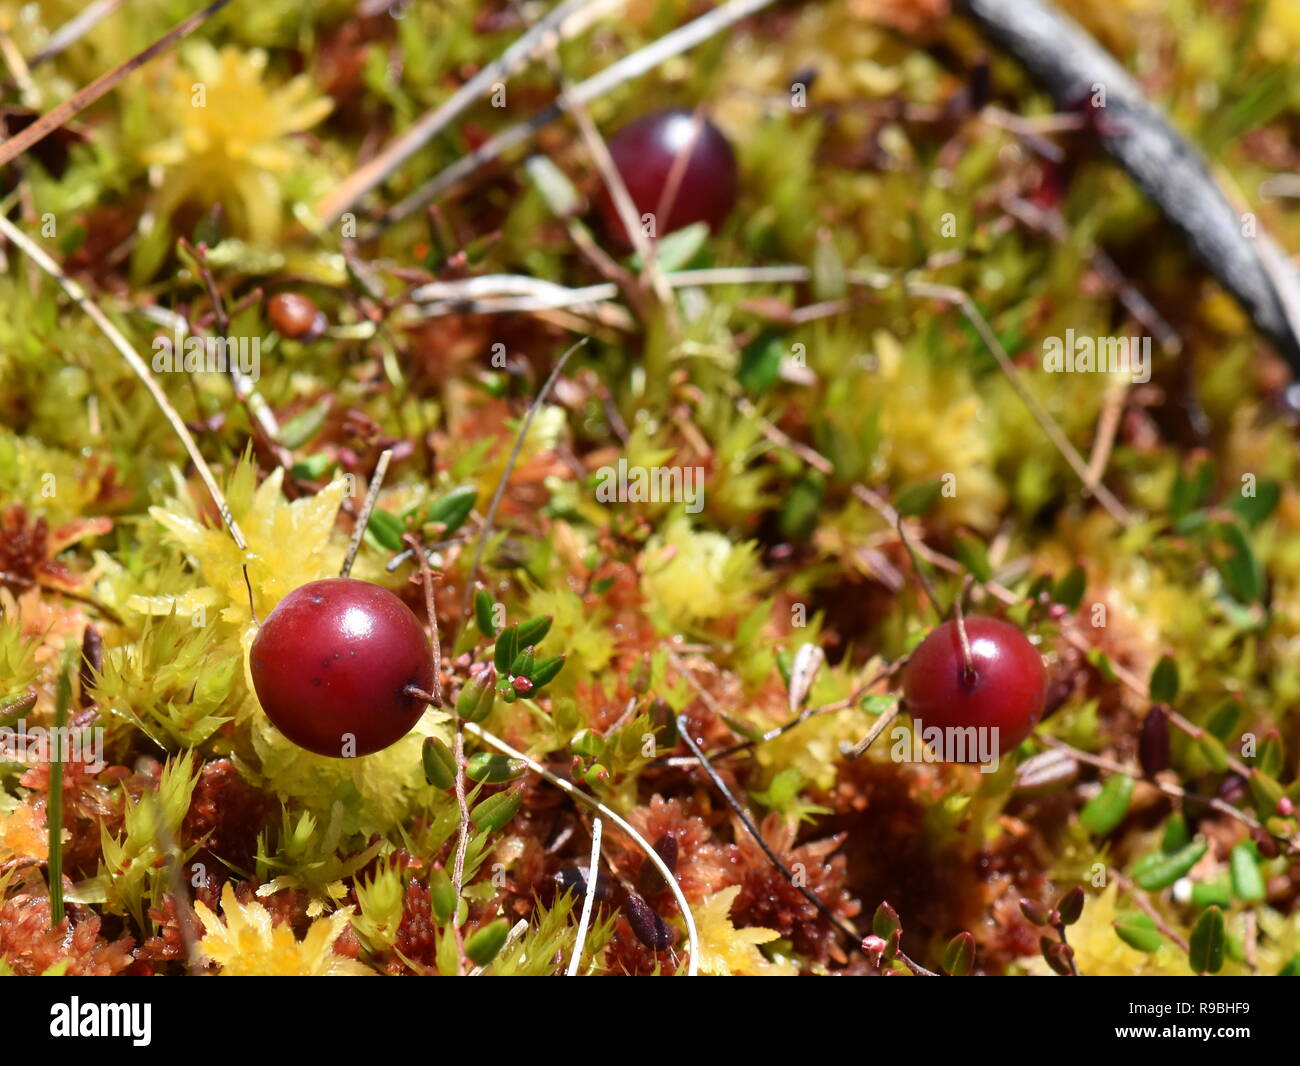 Bog cranberry Oxycoccus vaccinium growing in sphagnum moss on a swamp Stock Photo